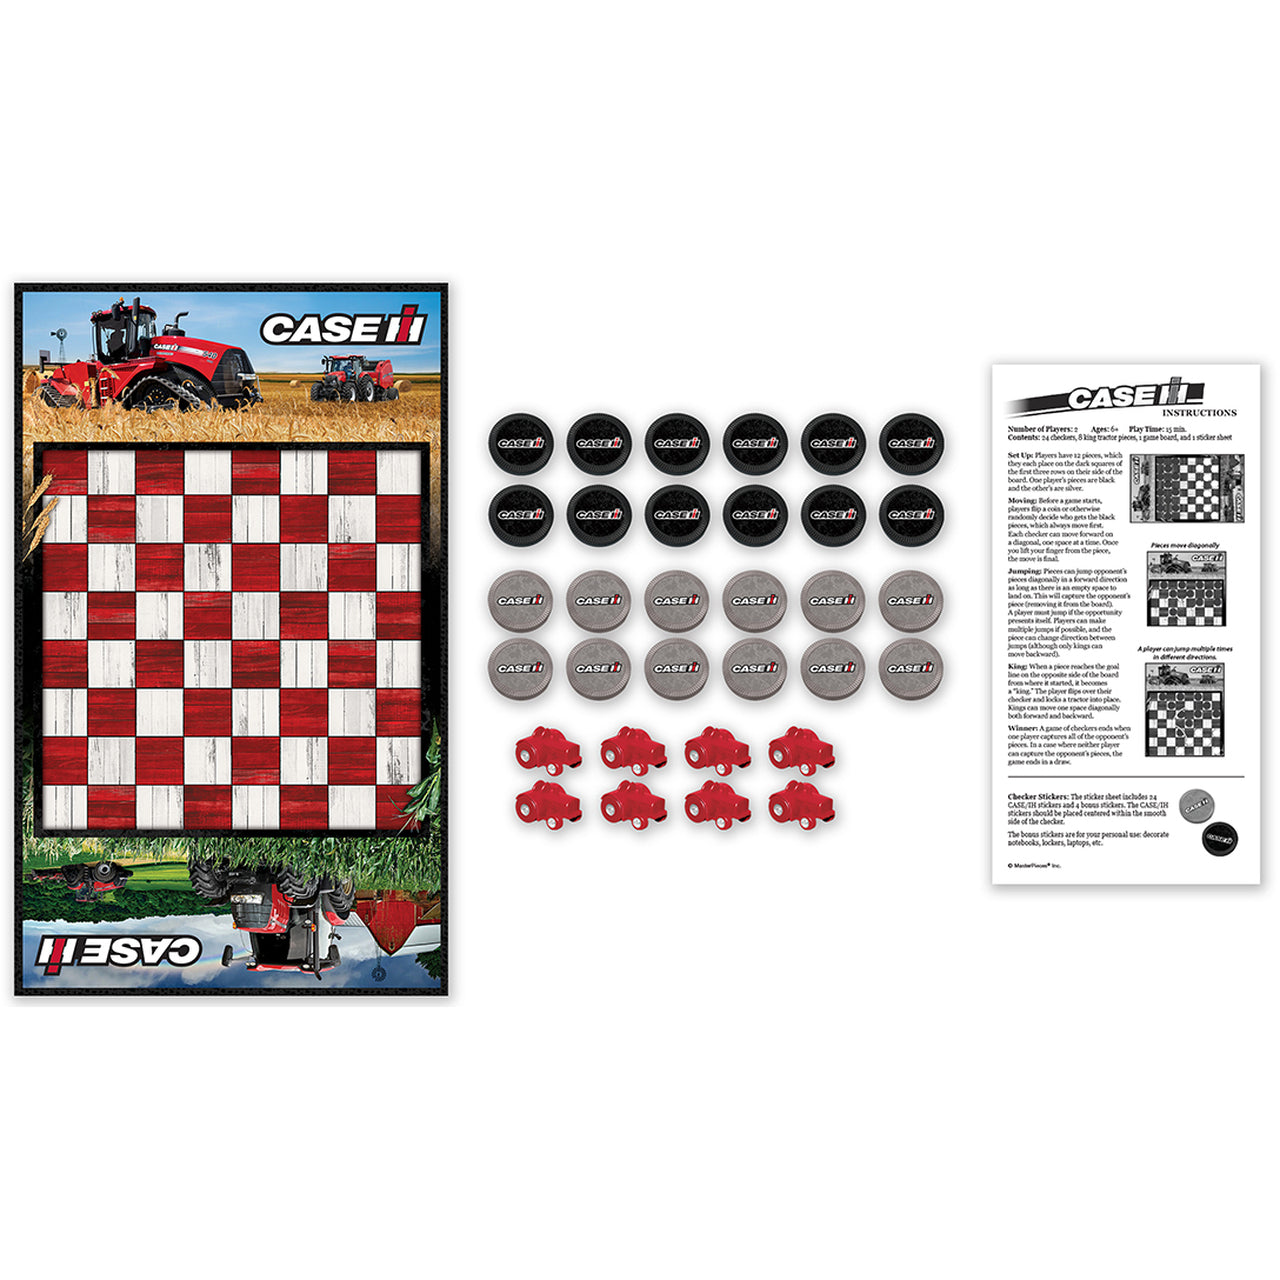 Case IH Checkers Board Game by Masterpieces